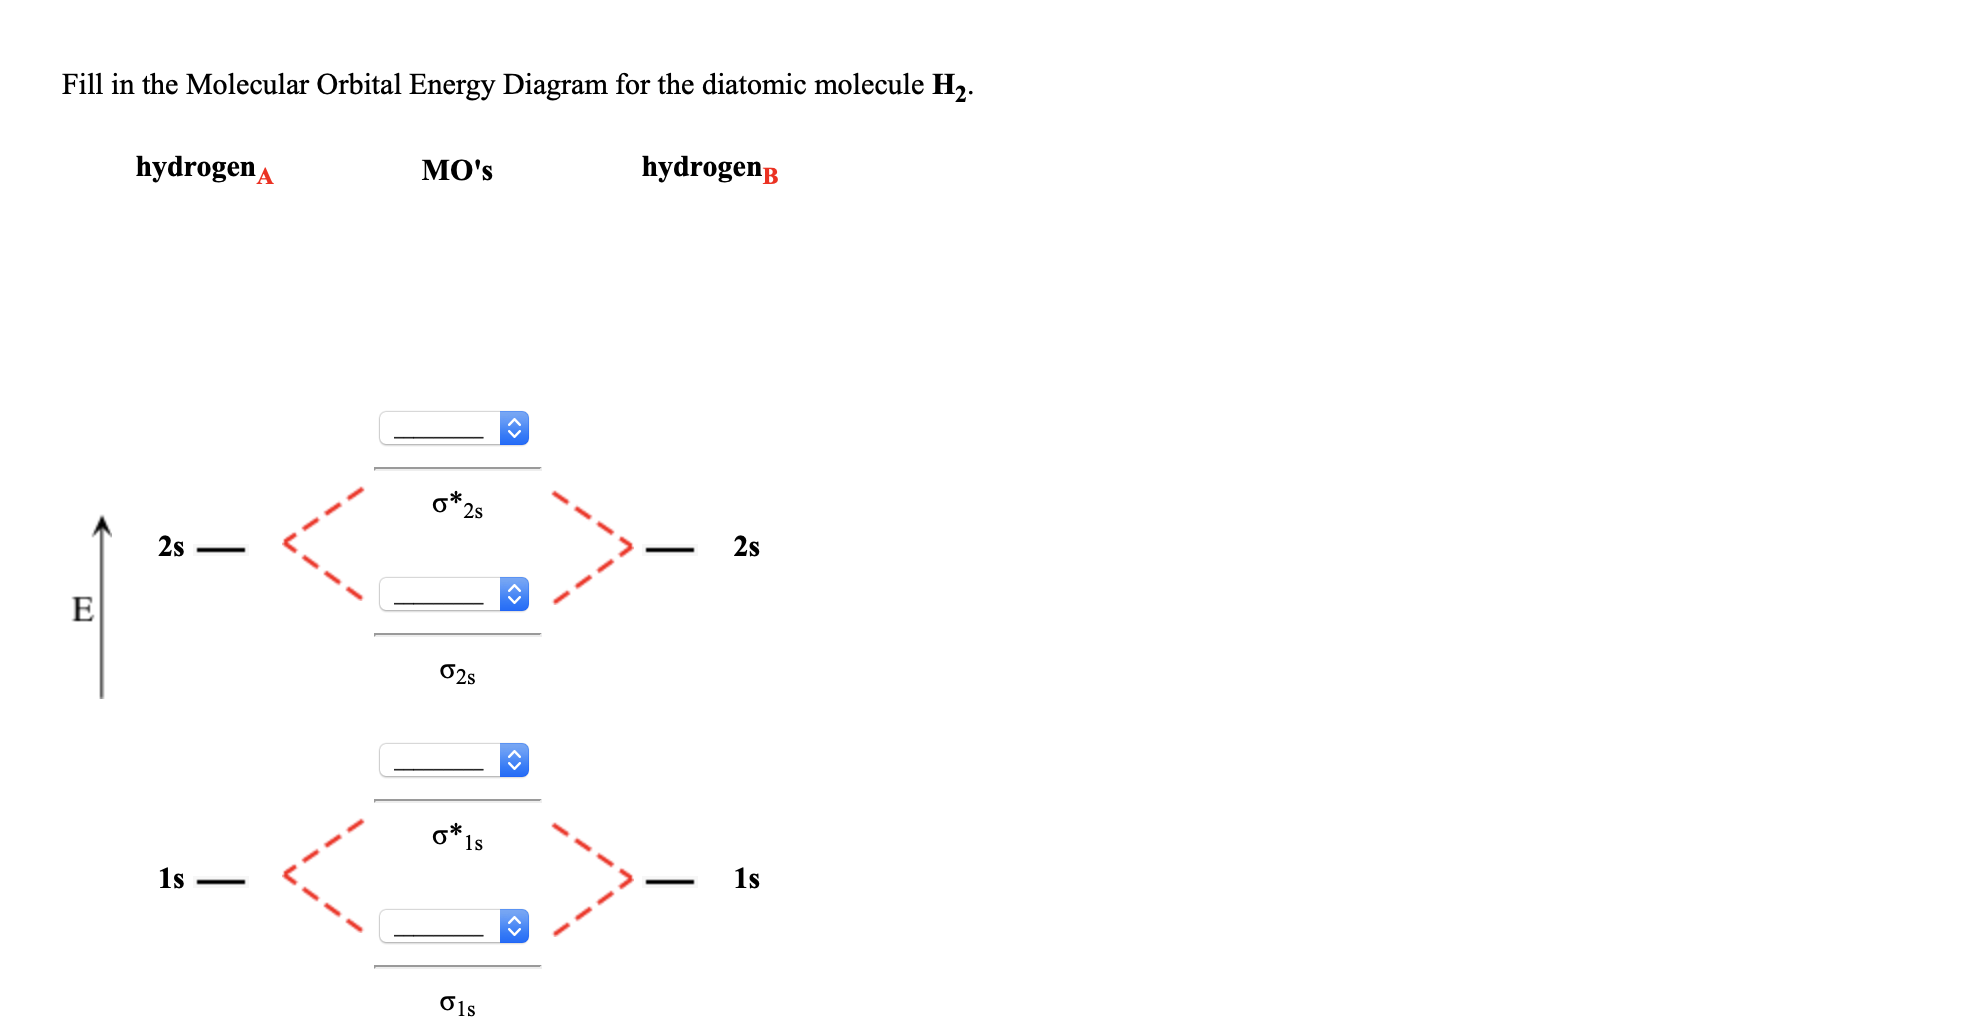 Fill in the Molecular Orbital Energy Diagram for the diatomic molecule H,.
hydrogenA
MO's
hydrogeng
2s
2s
2s
б25
1s
1s
1s
O1s
